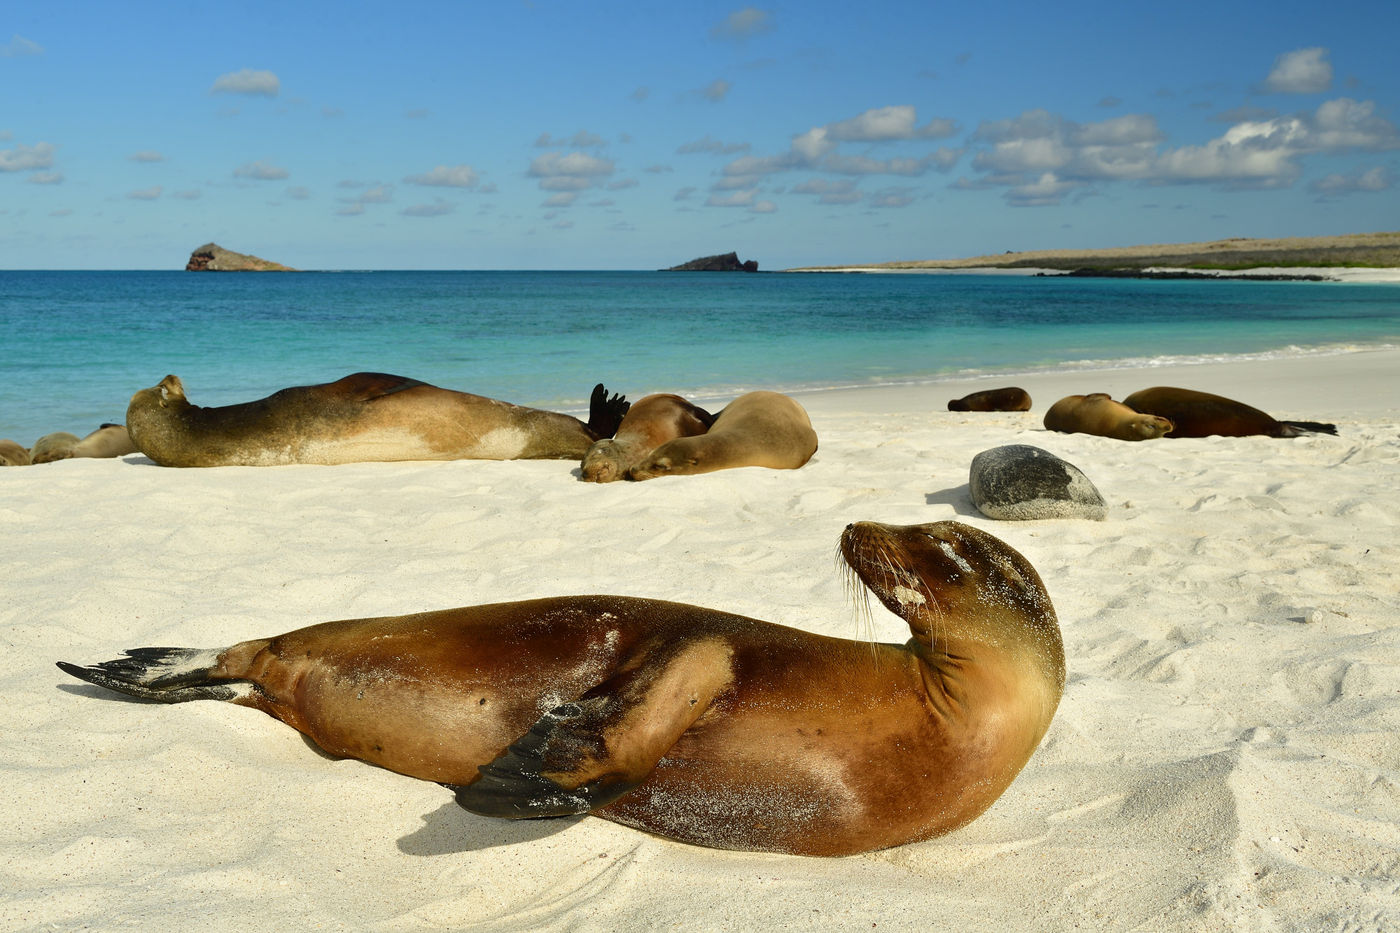 The landscape is highly diverse on the Galapagos, with white beaches besides the rocky shorelines. © Yves Adams